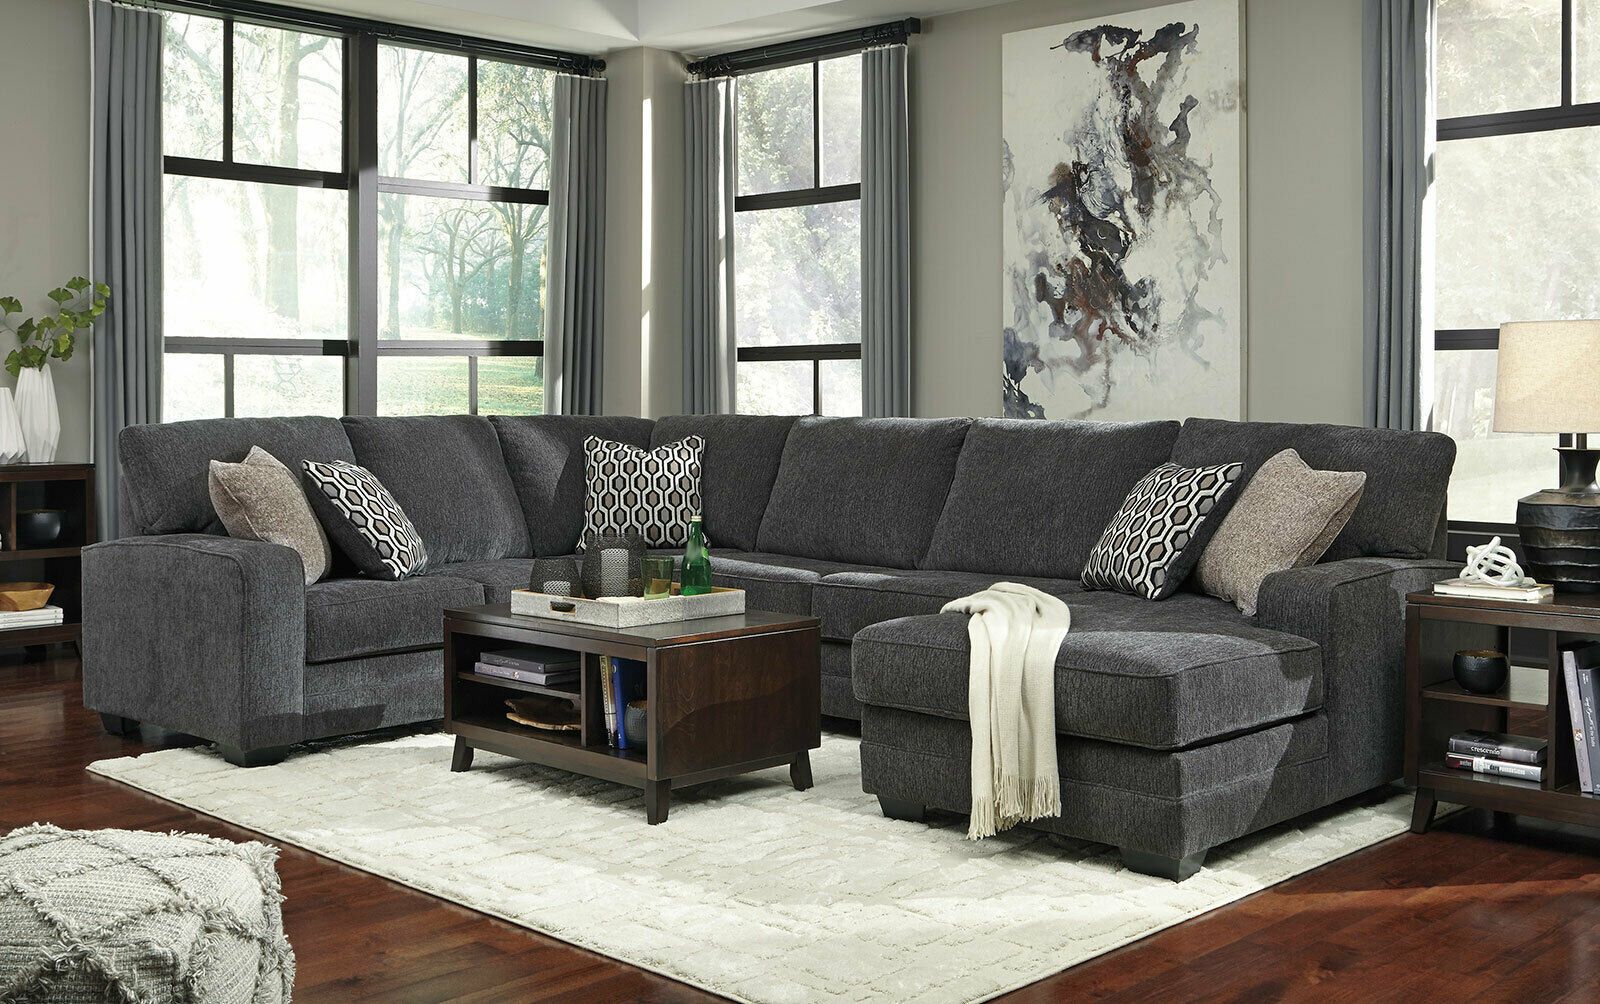 New Modern Sectional Living Room Dark Gray Chenille Sofa Couch Chaise Throughout Dark Gray Sectional Sofas (Gallery 14 of 20)